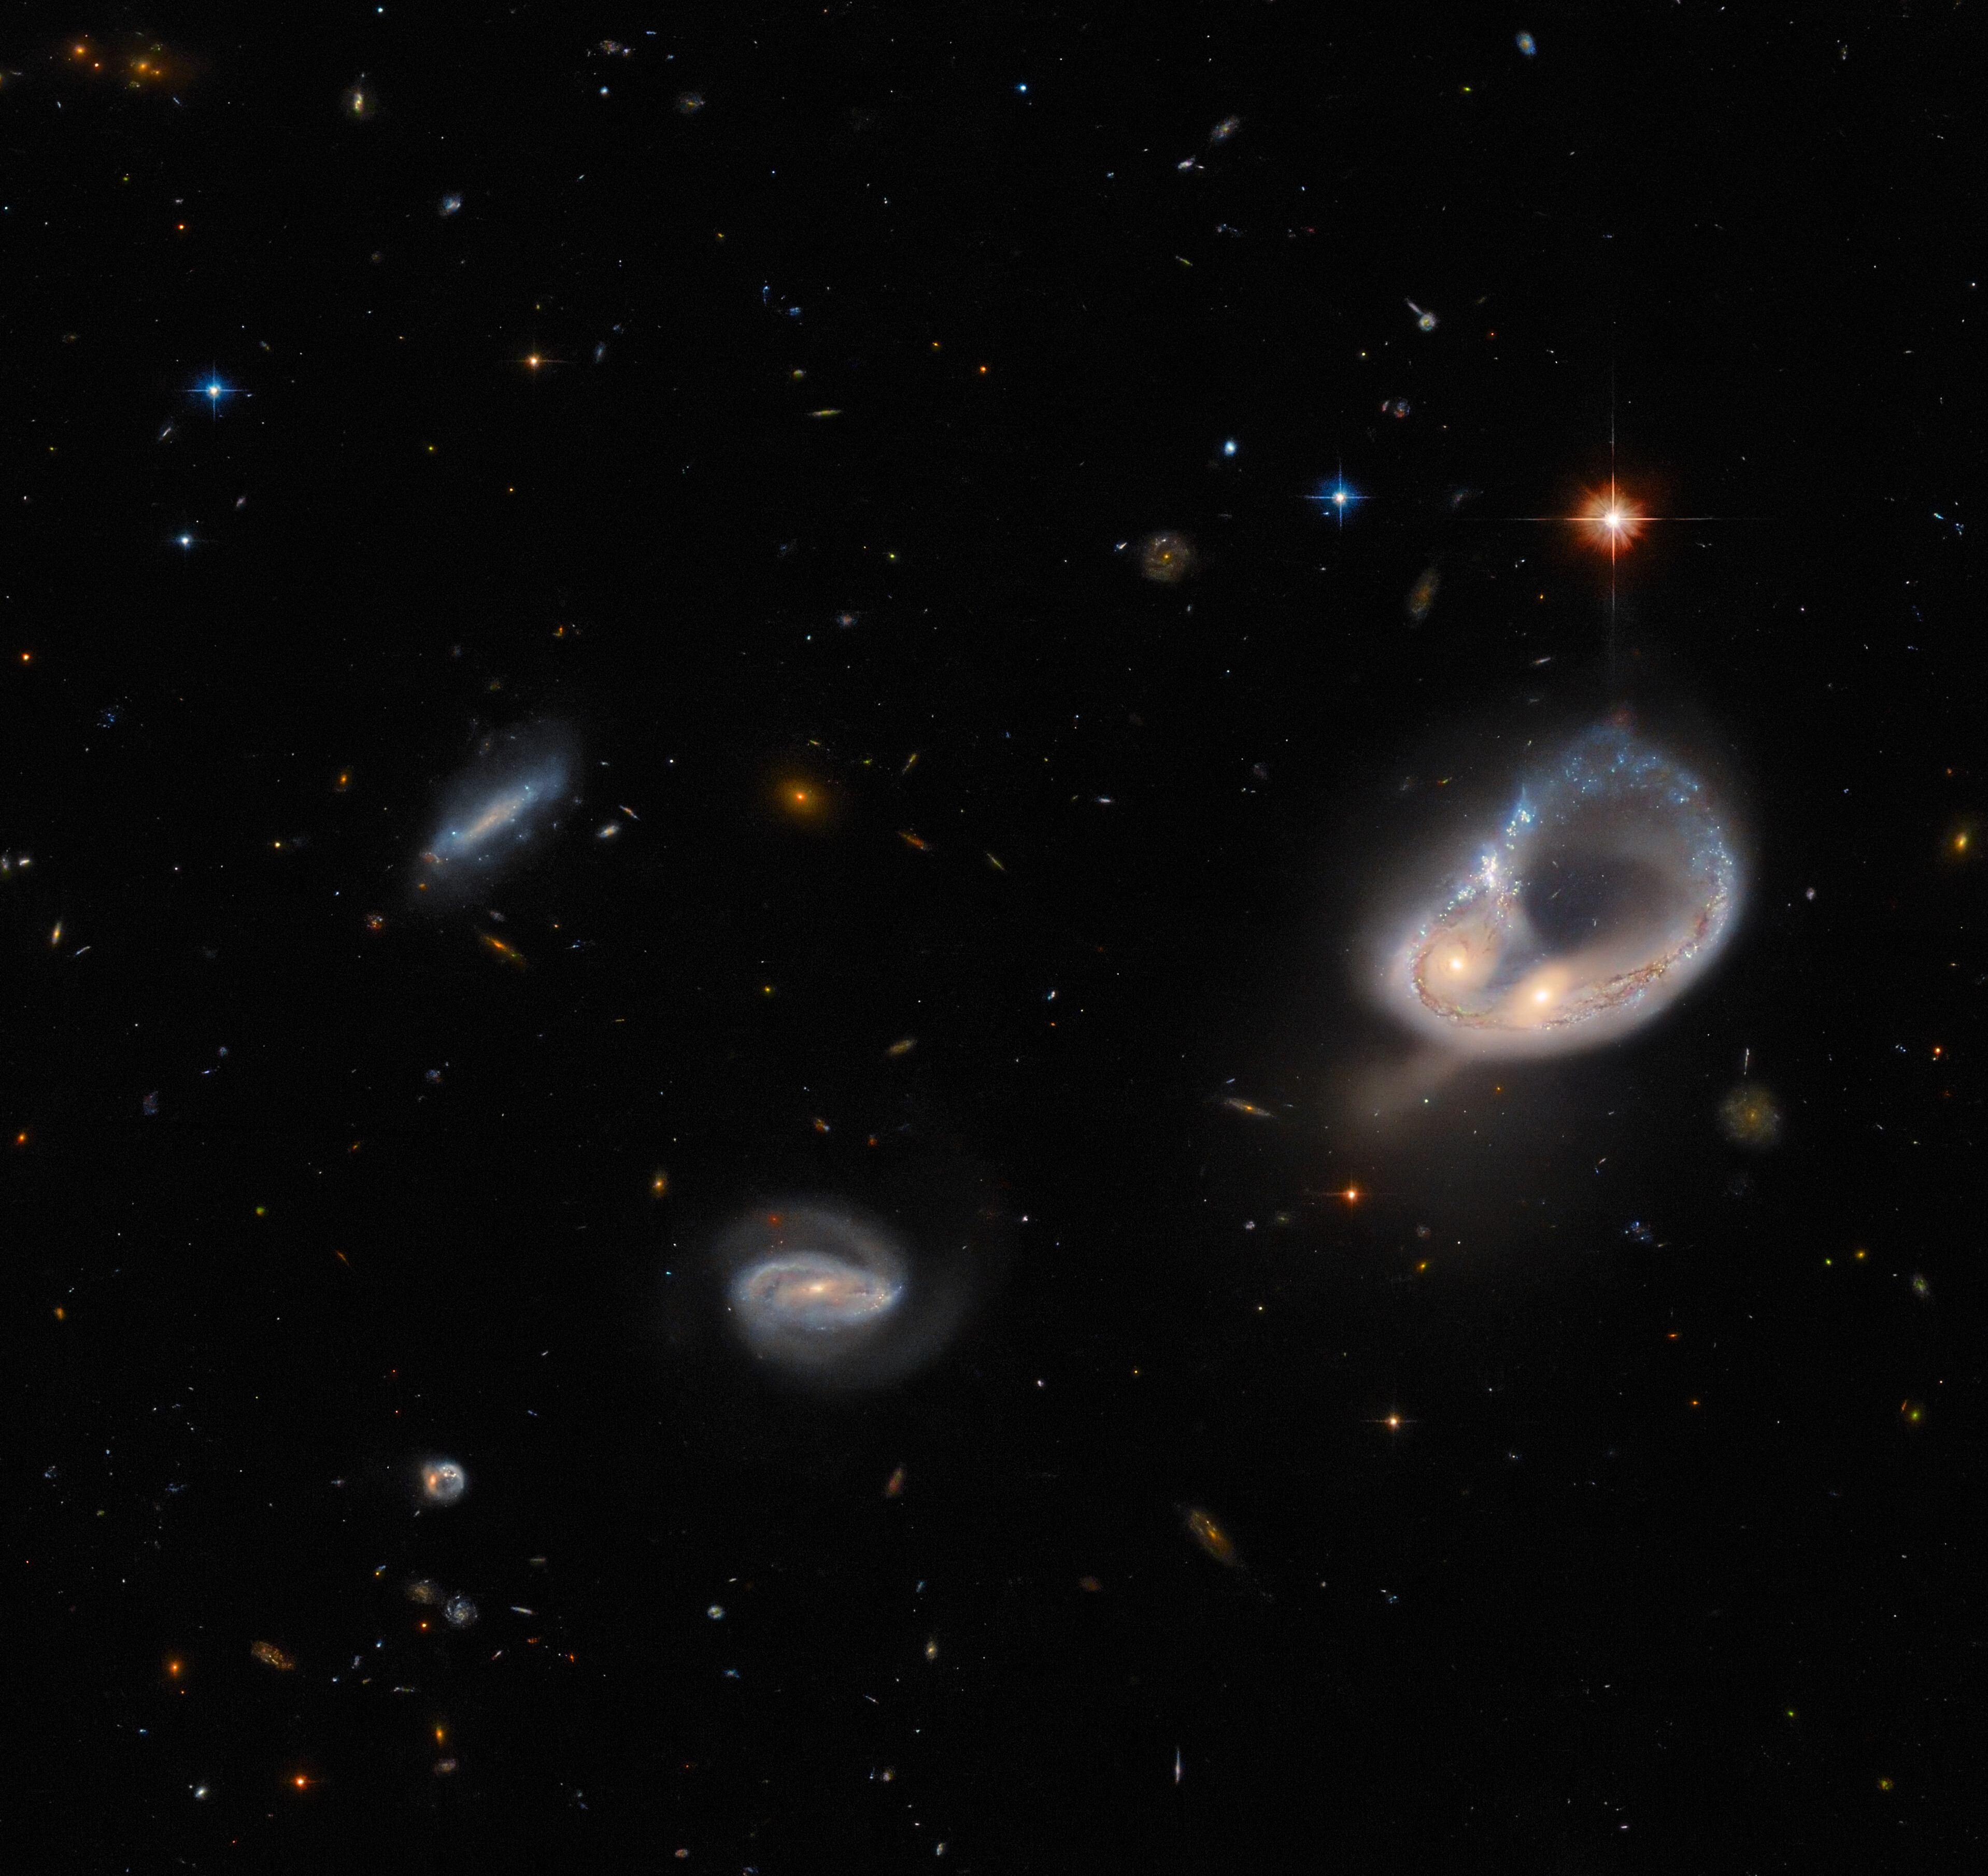 Hubble captures pair of galaxies merging into unusual shape